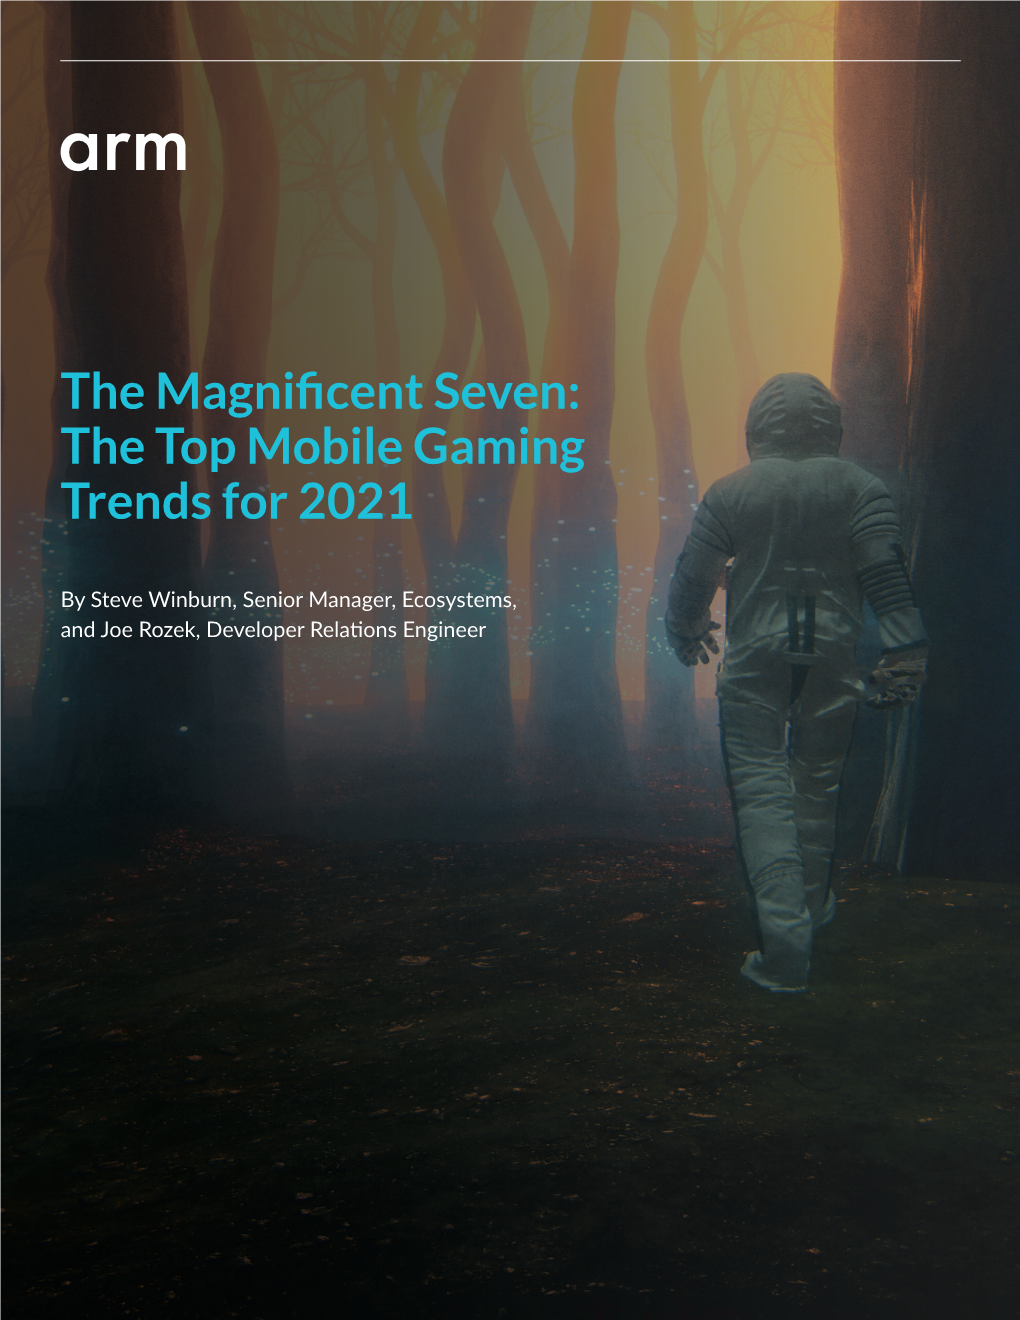 The Magnificent Seven: the Top Mobile Gaming Trends for 2021